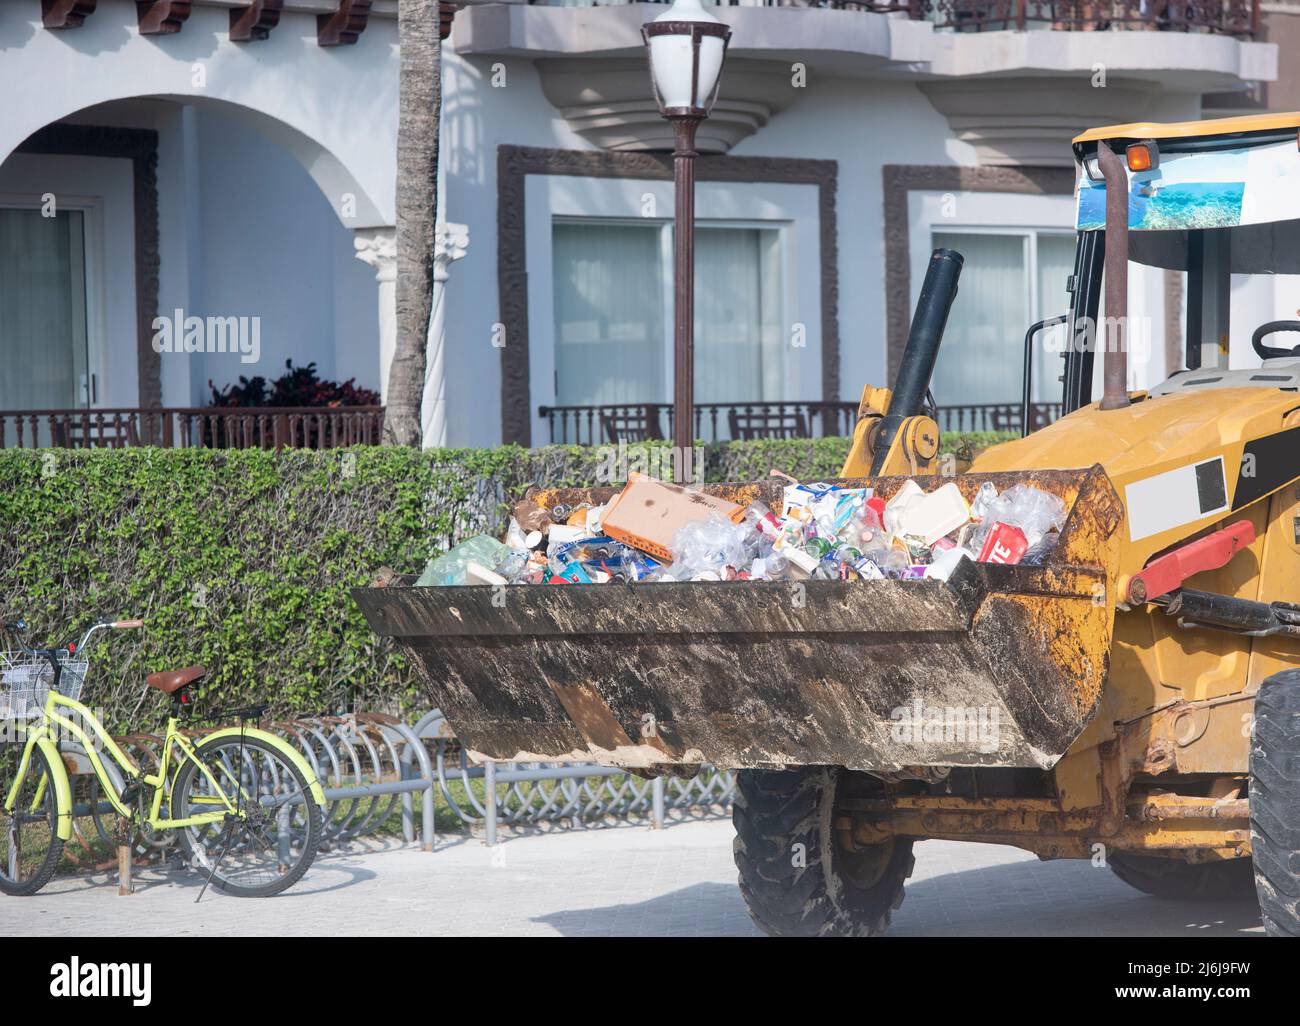 Close-up of a bulldozer hauling trash on an urban street in Mexico Stock Photo